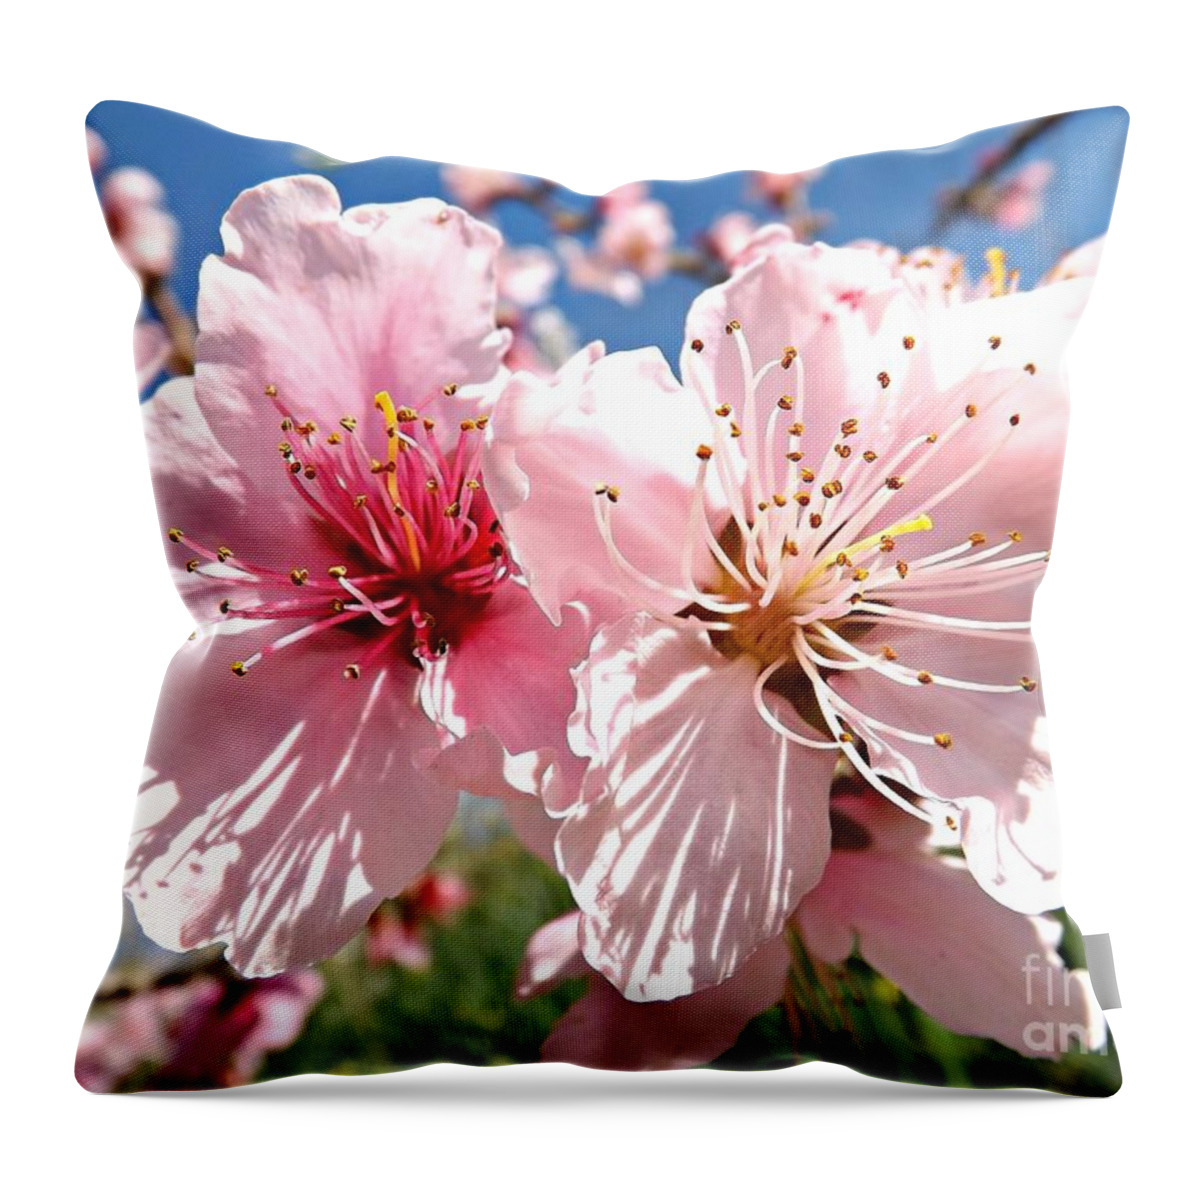 Peach Throw Pillow featuring the photograph Peach Blossom by Clare Bevan